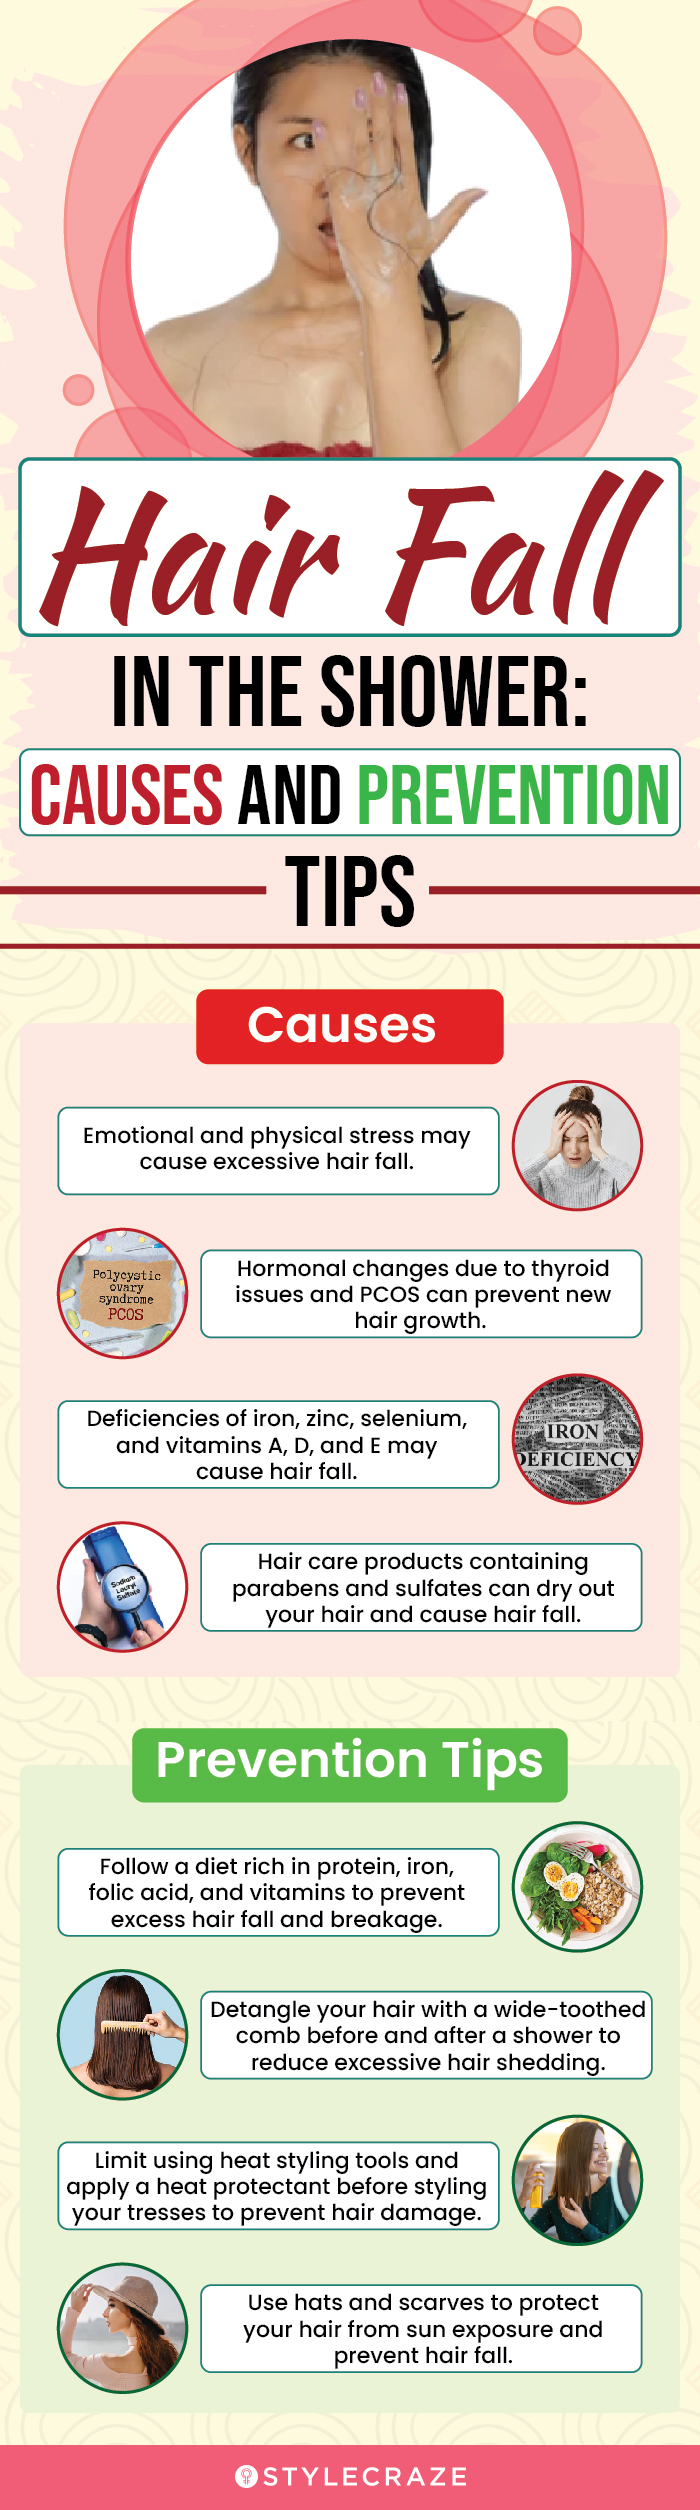 hair fall in the shower causes and prevention tips (infographic)